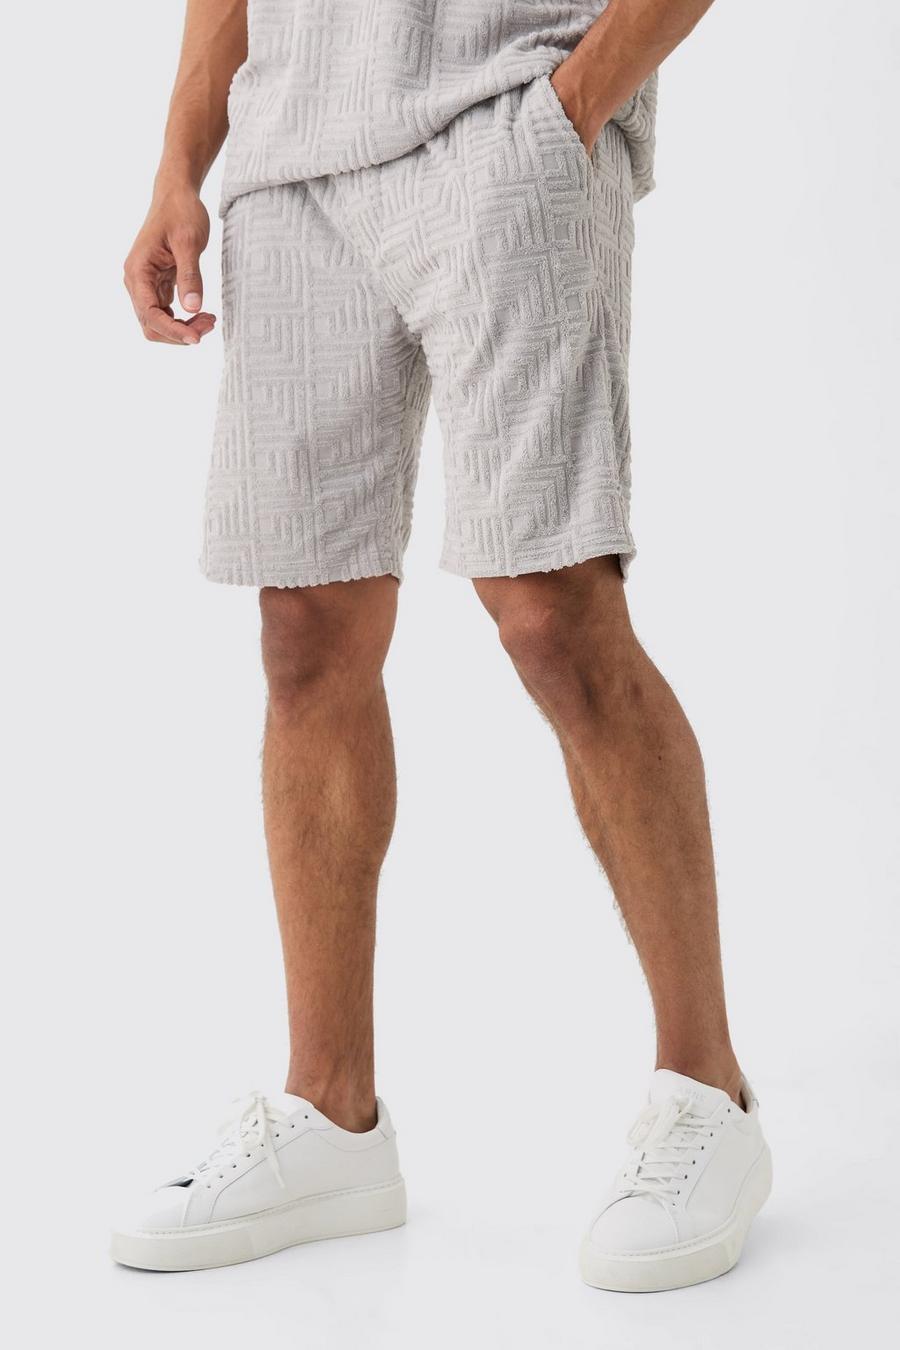 Lockere Jacquard Frottee-Shorts, Light grey image number 1